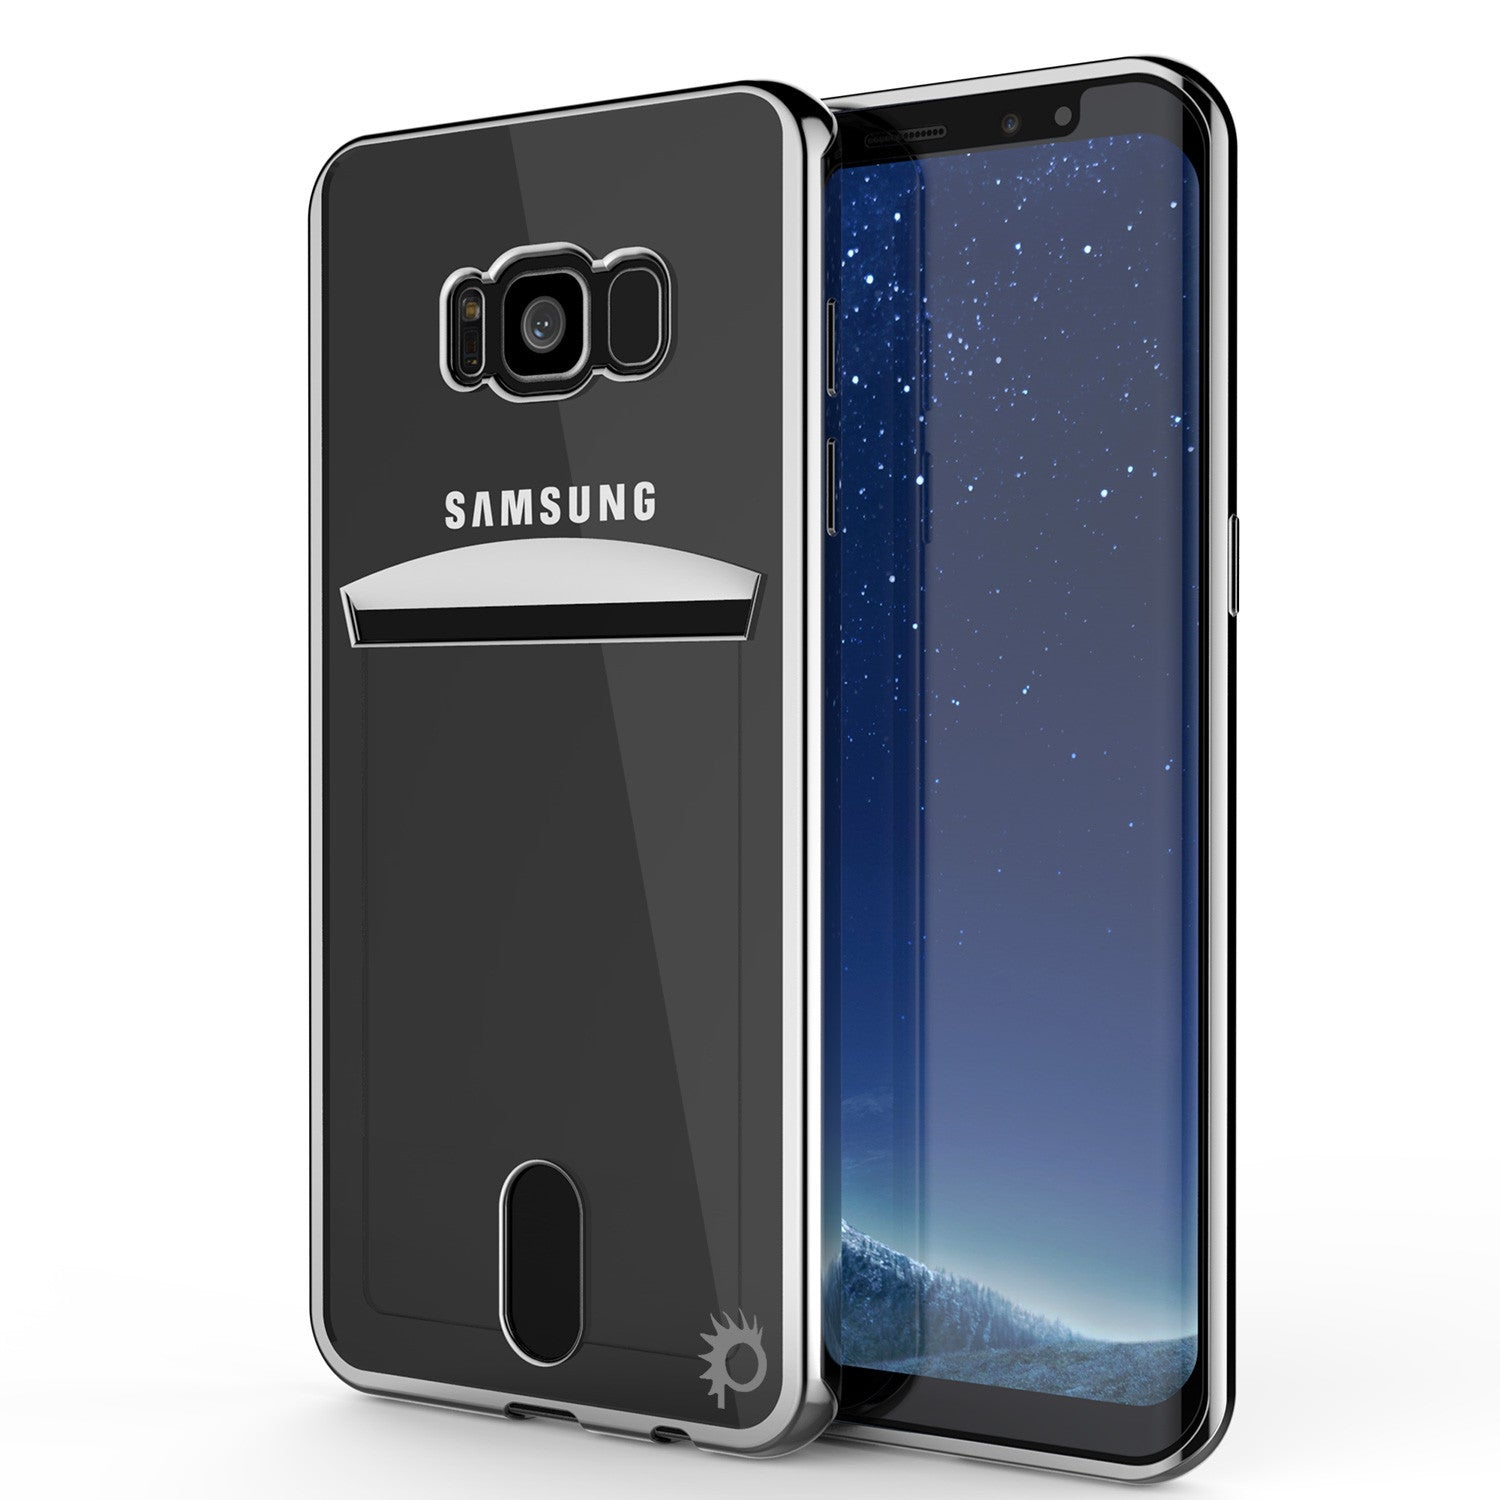 Galaxy S8 Case, PUNKCASE® LUCID Silver Series | Card Slot | SHIELD Screen Protector | Ultra fit (Color in image: Silver)